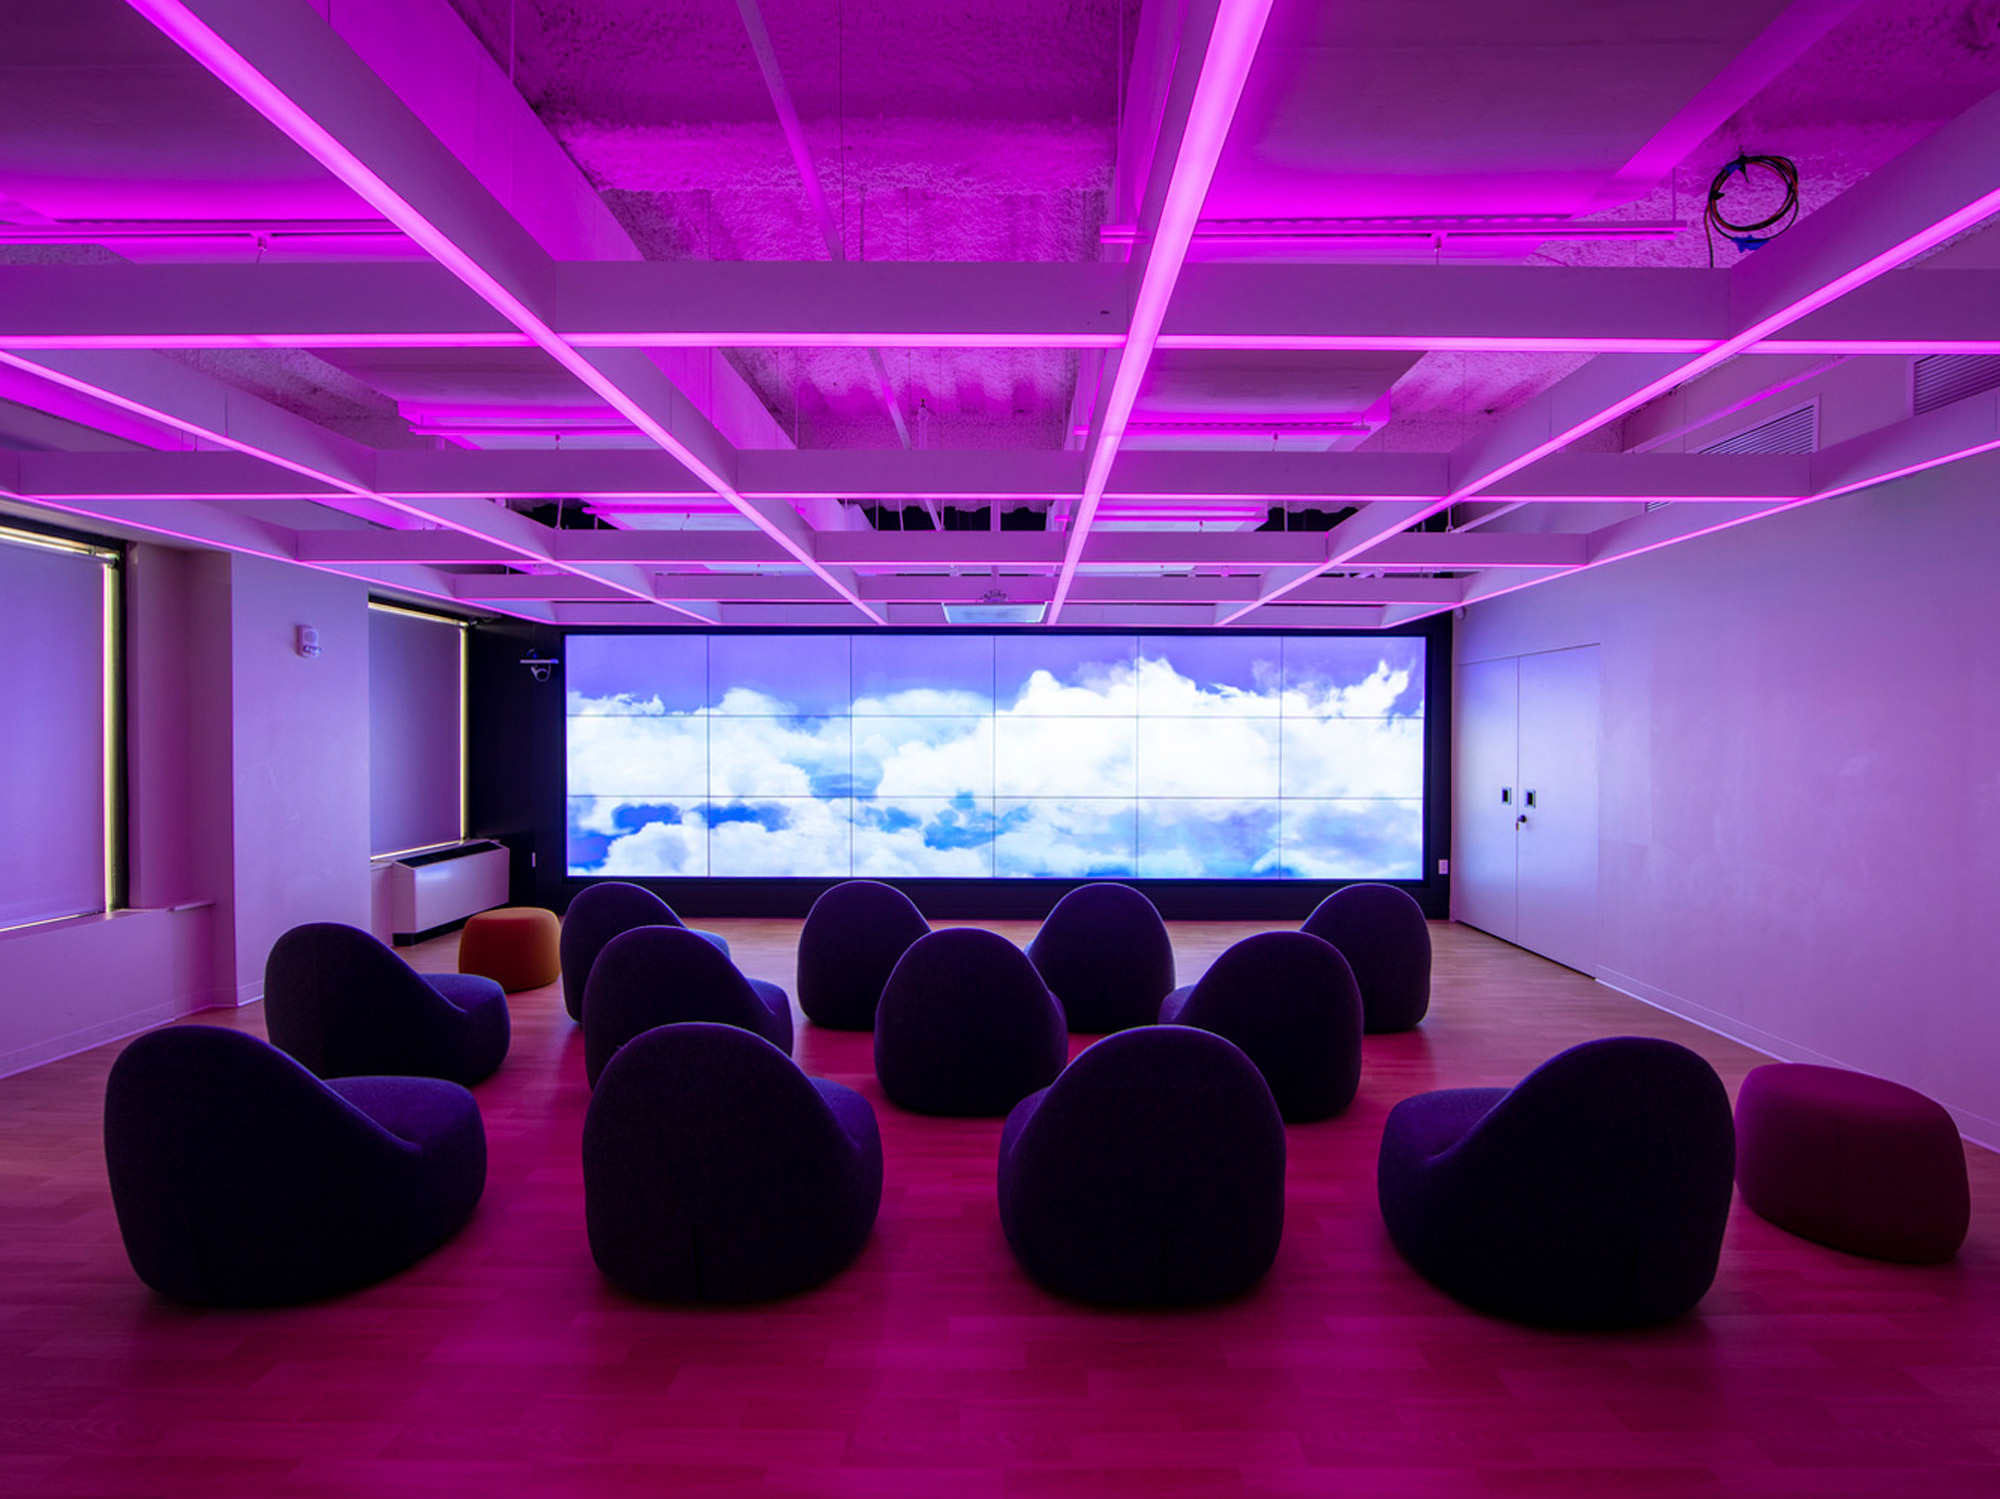 Modern interior with vibrant pink and purple LED lighting on the ceiling, complementing the dark beanbag chairs scattered across the carpeted floor, in front of a panoramic screen displaying a serene sky.